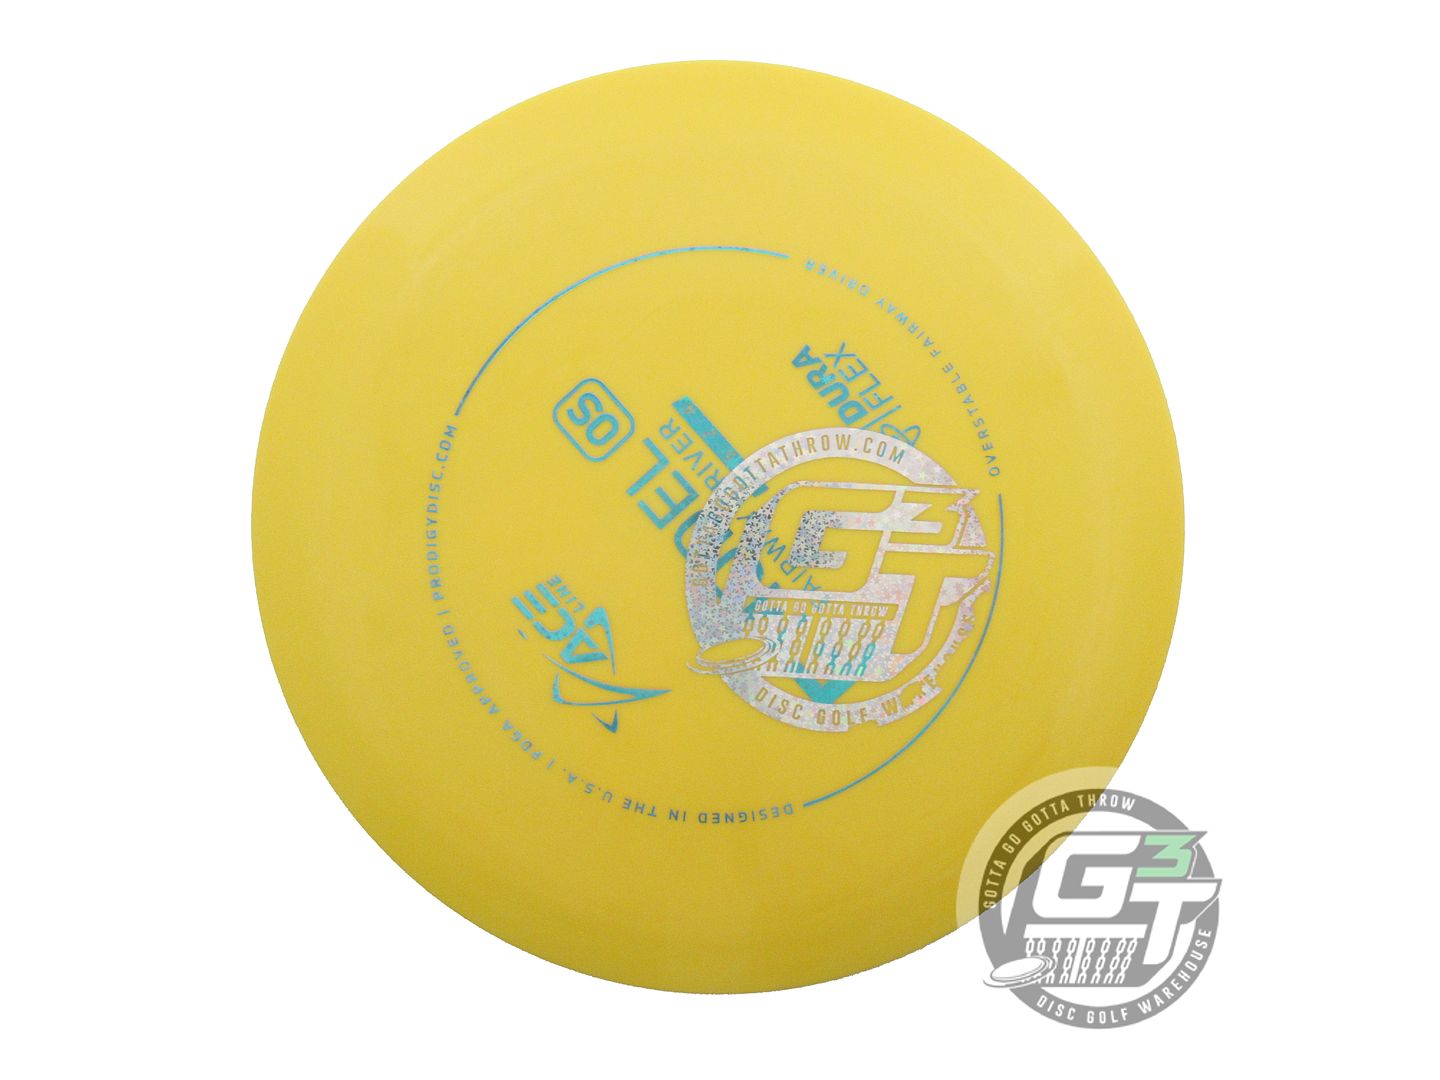 Prodigy Factory Second Ace Line DuraFlex F Model OS Fairway Driver Golf Disc (Individually Listed)